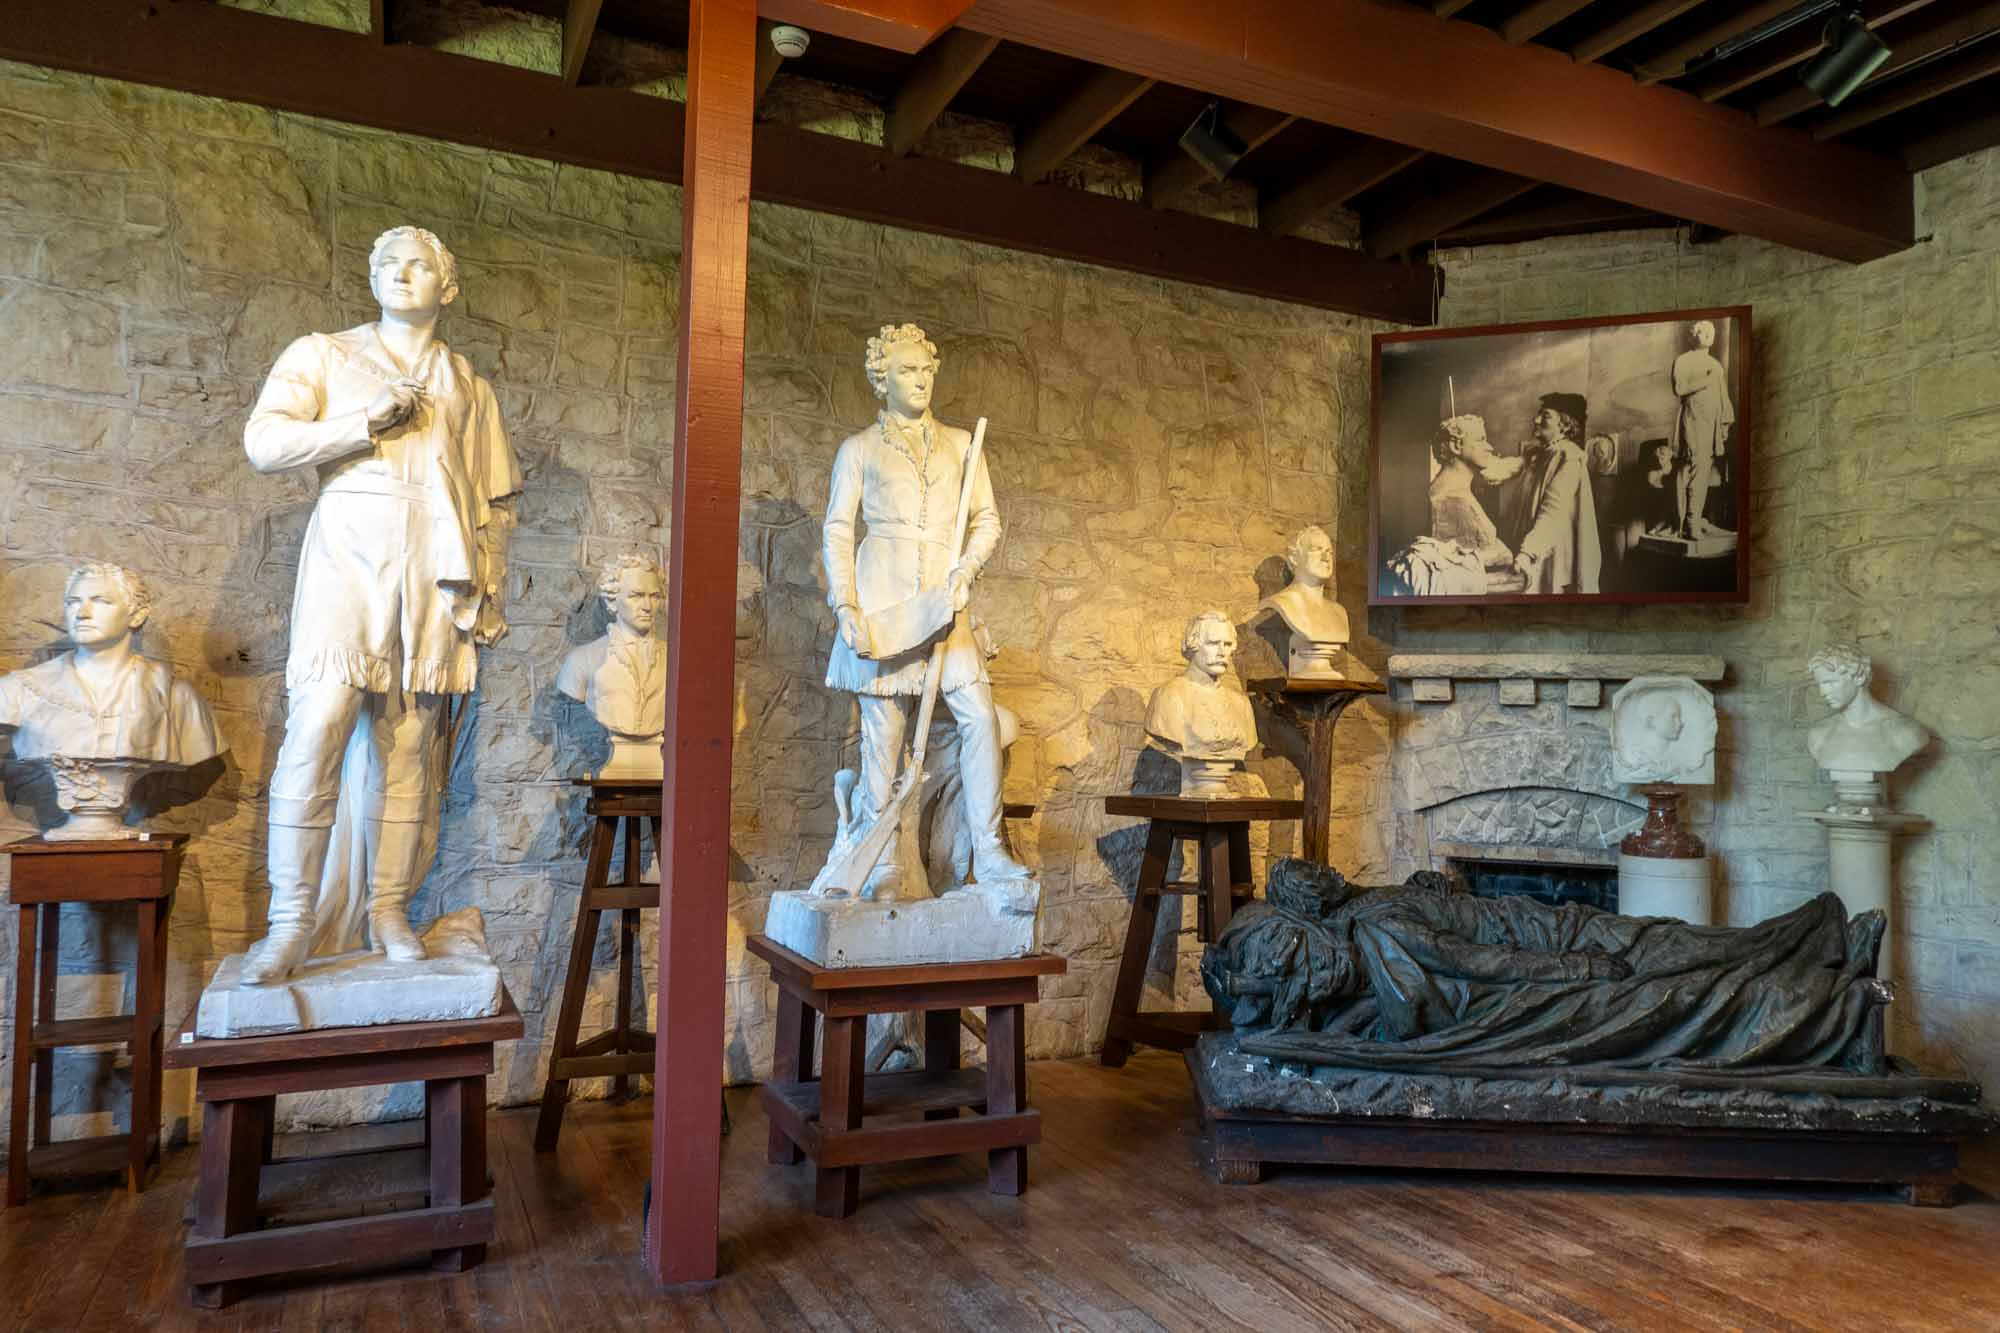 Sculptures displayed in a room with rustic stone walls